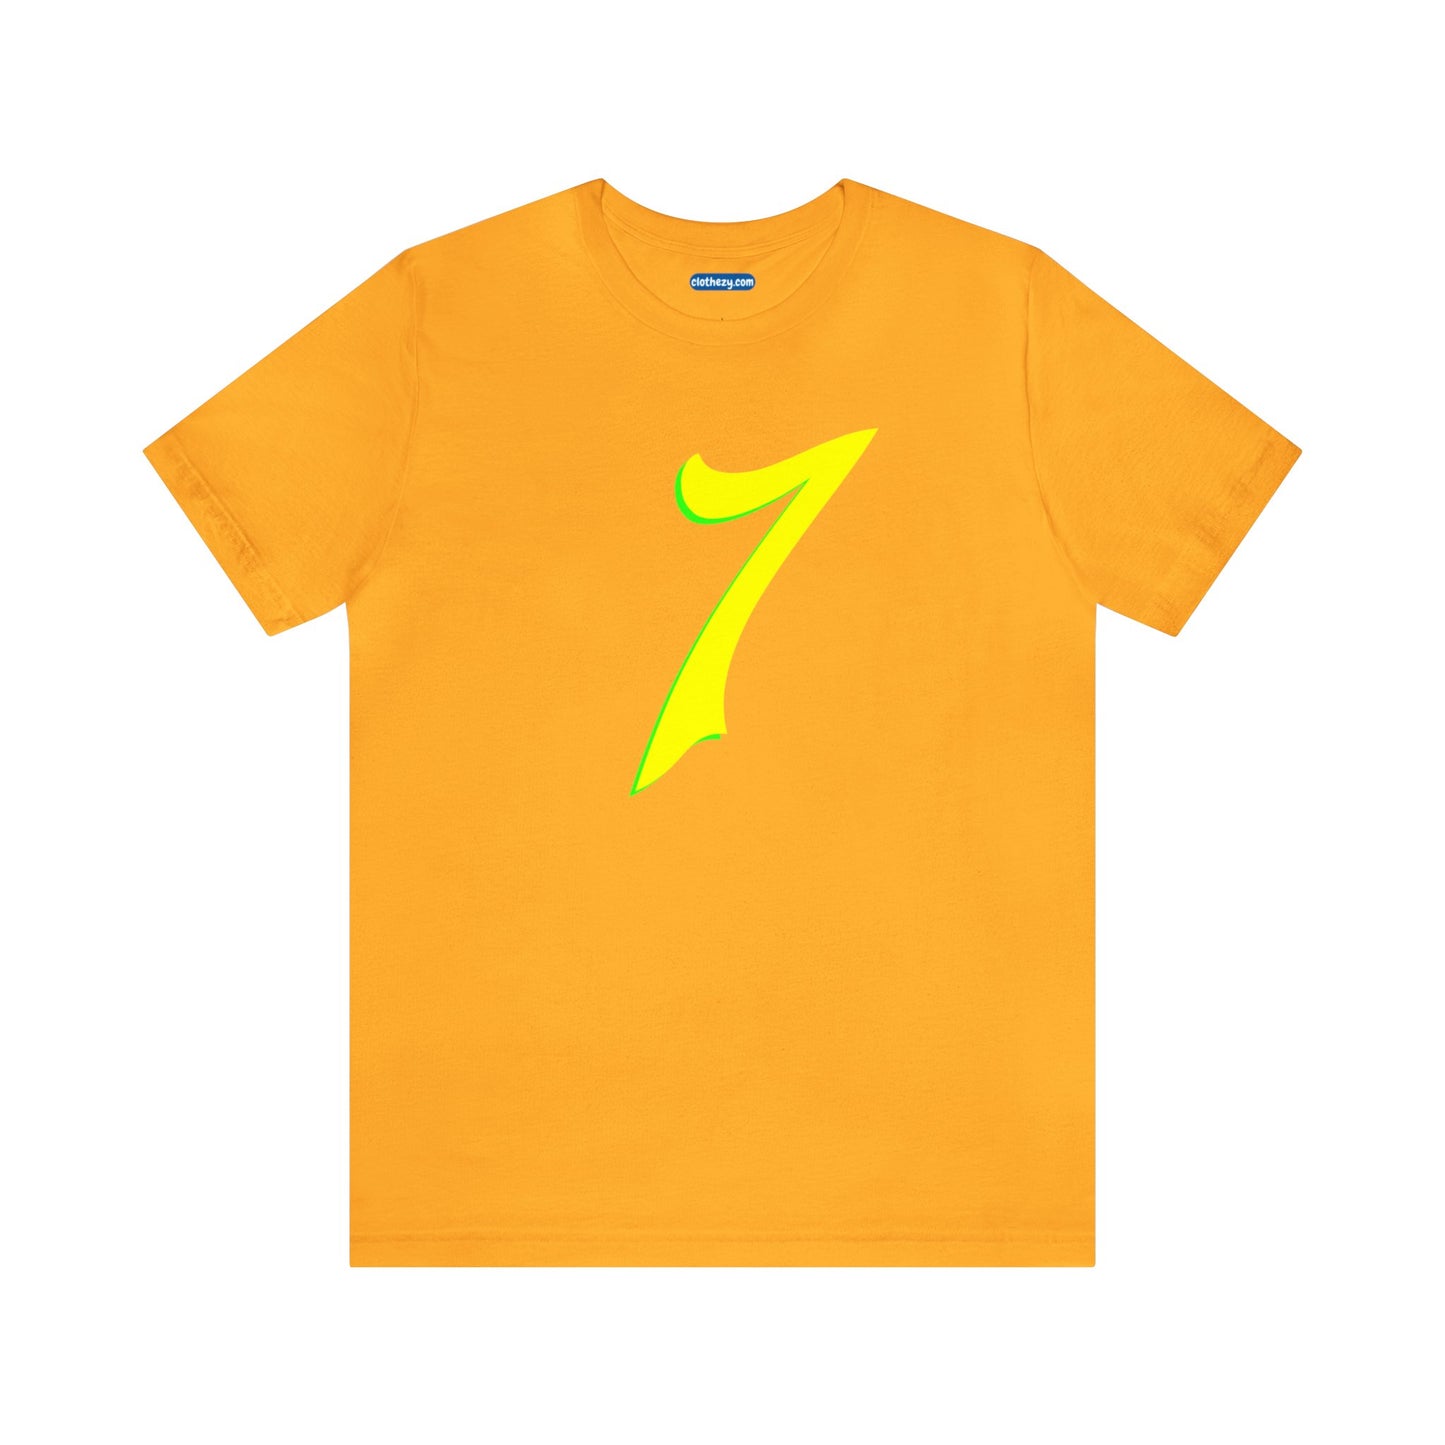 Number 7 Design - Soft Cotton Tee for birthdays and celebrations, Gift for friends and family, Multiple Options by clothezy.com in Green Heather Size Small - Buy Now